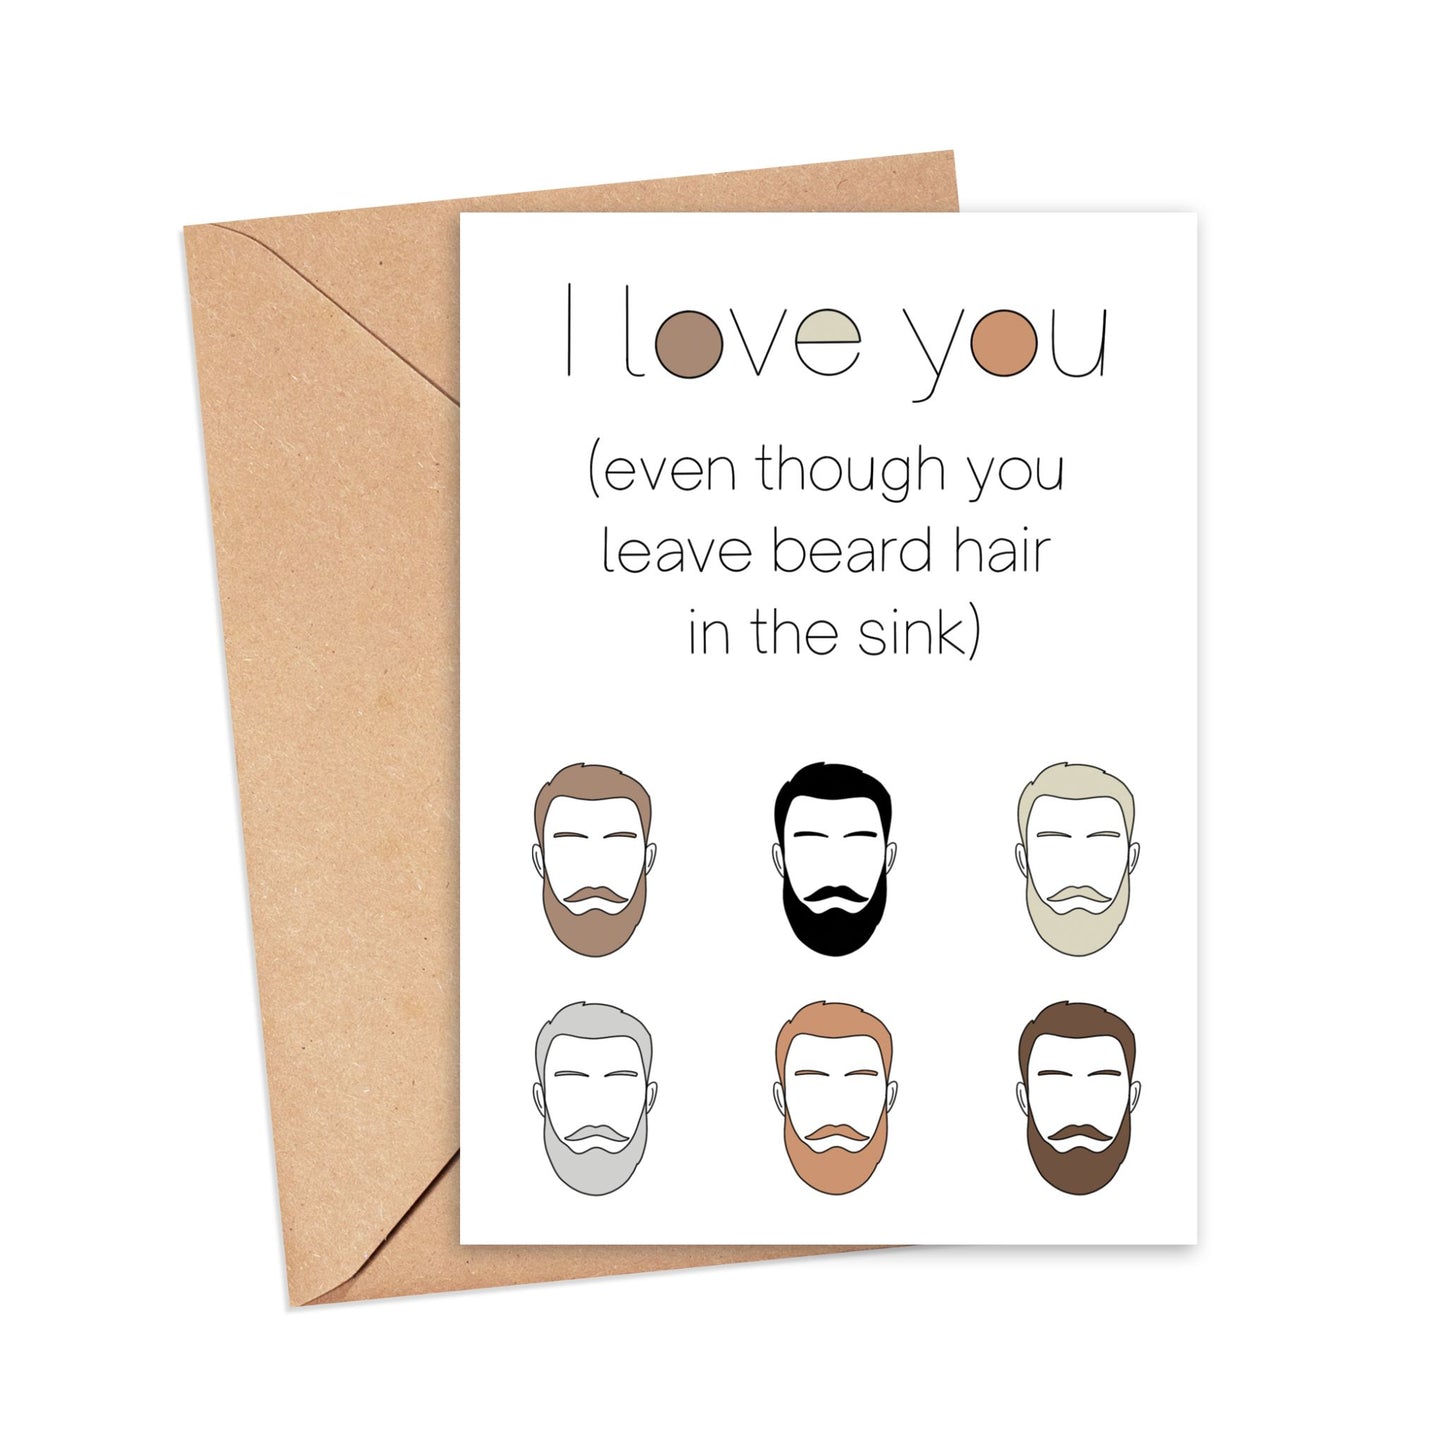 I Love You Even Though You Leave Beard Hair in the Sink Card Simply Happy Cards